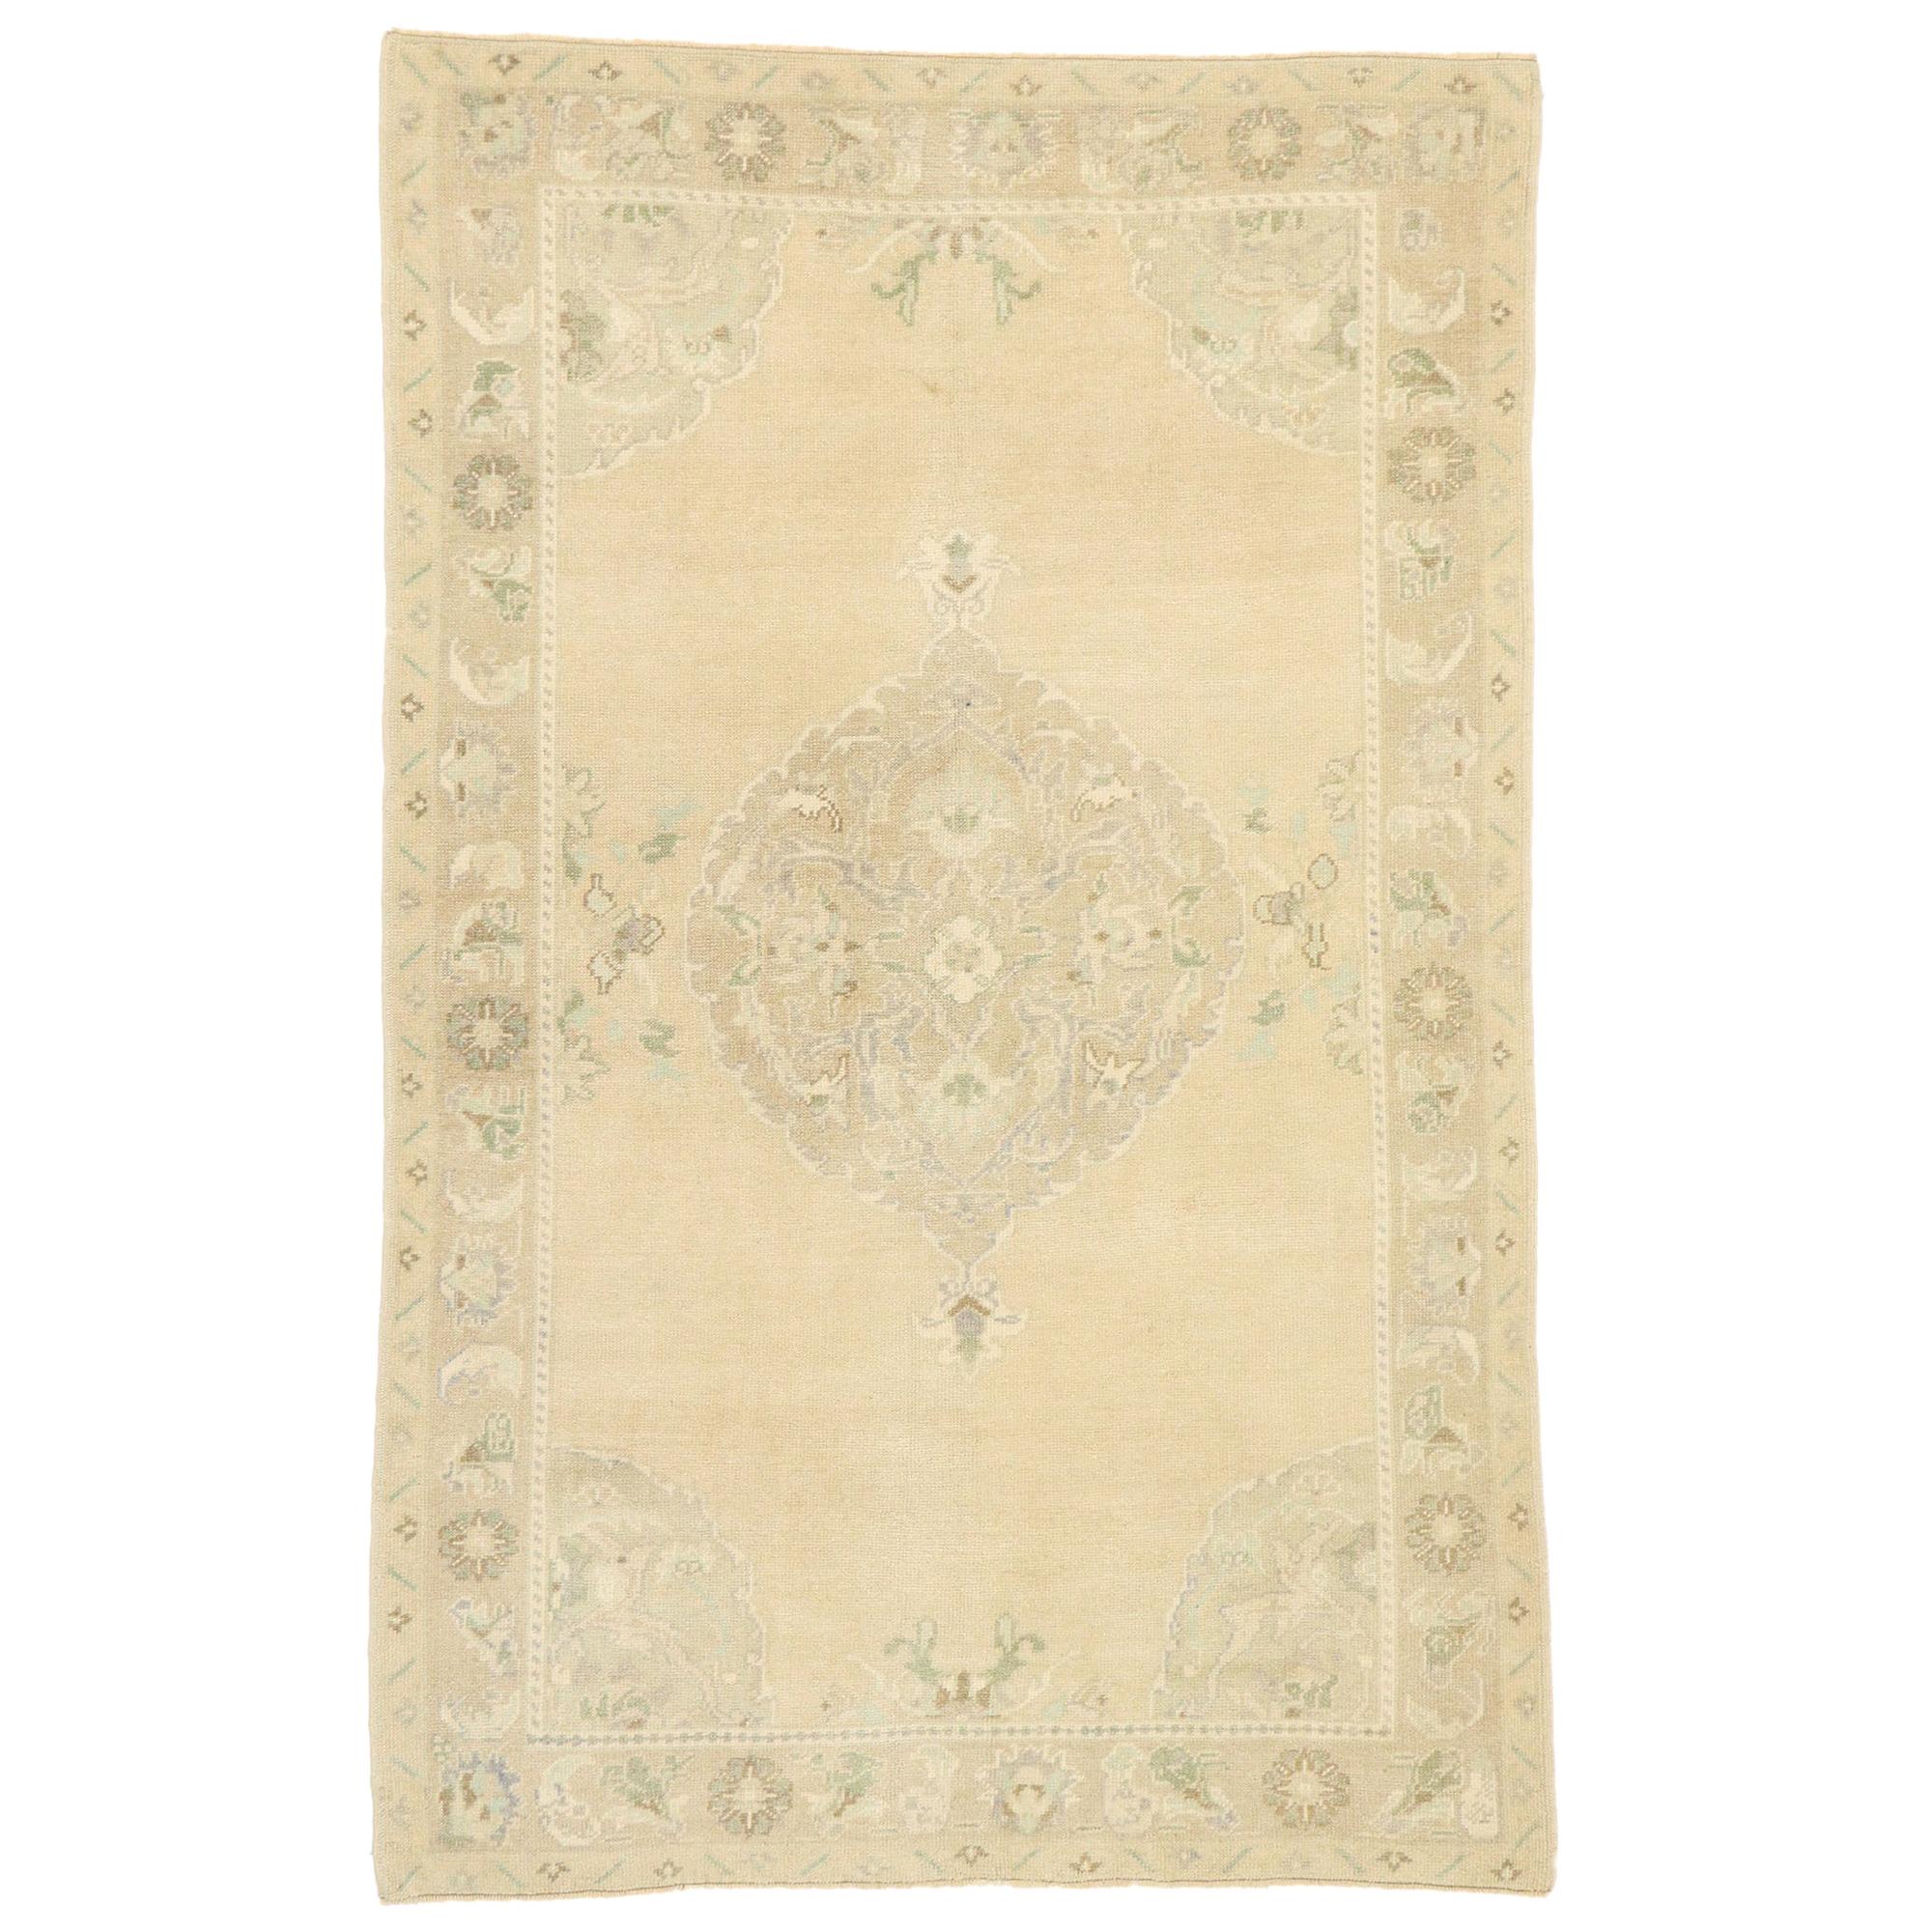 Vintage Turkish Oushak Accent Rug with French Renaissance Chateau Style